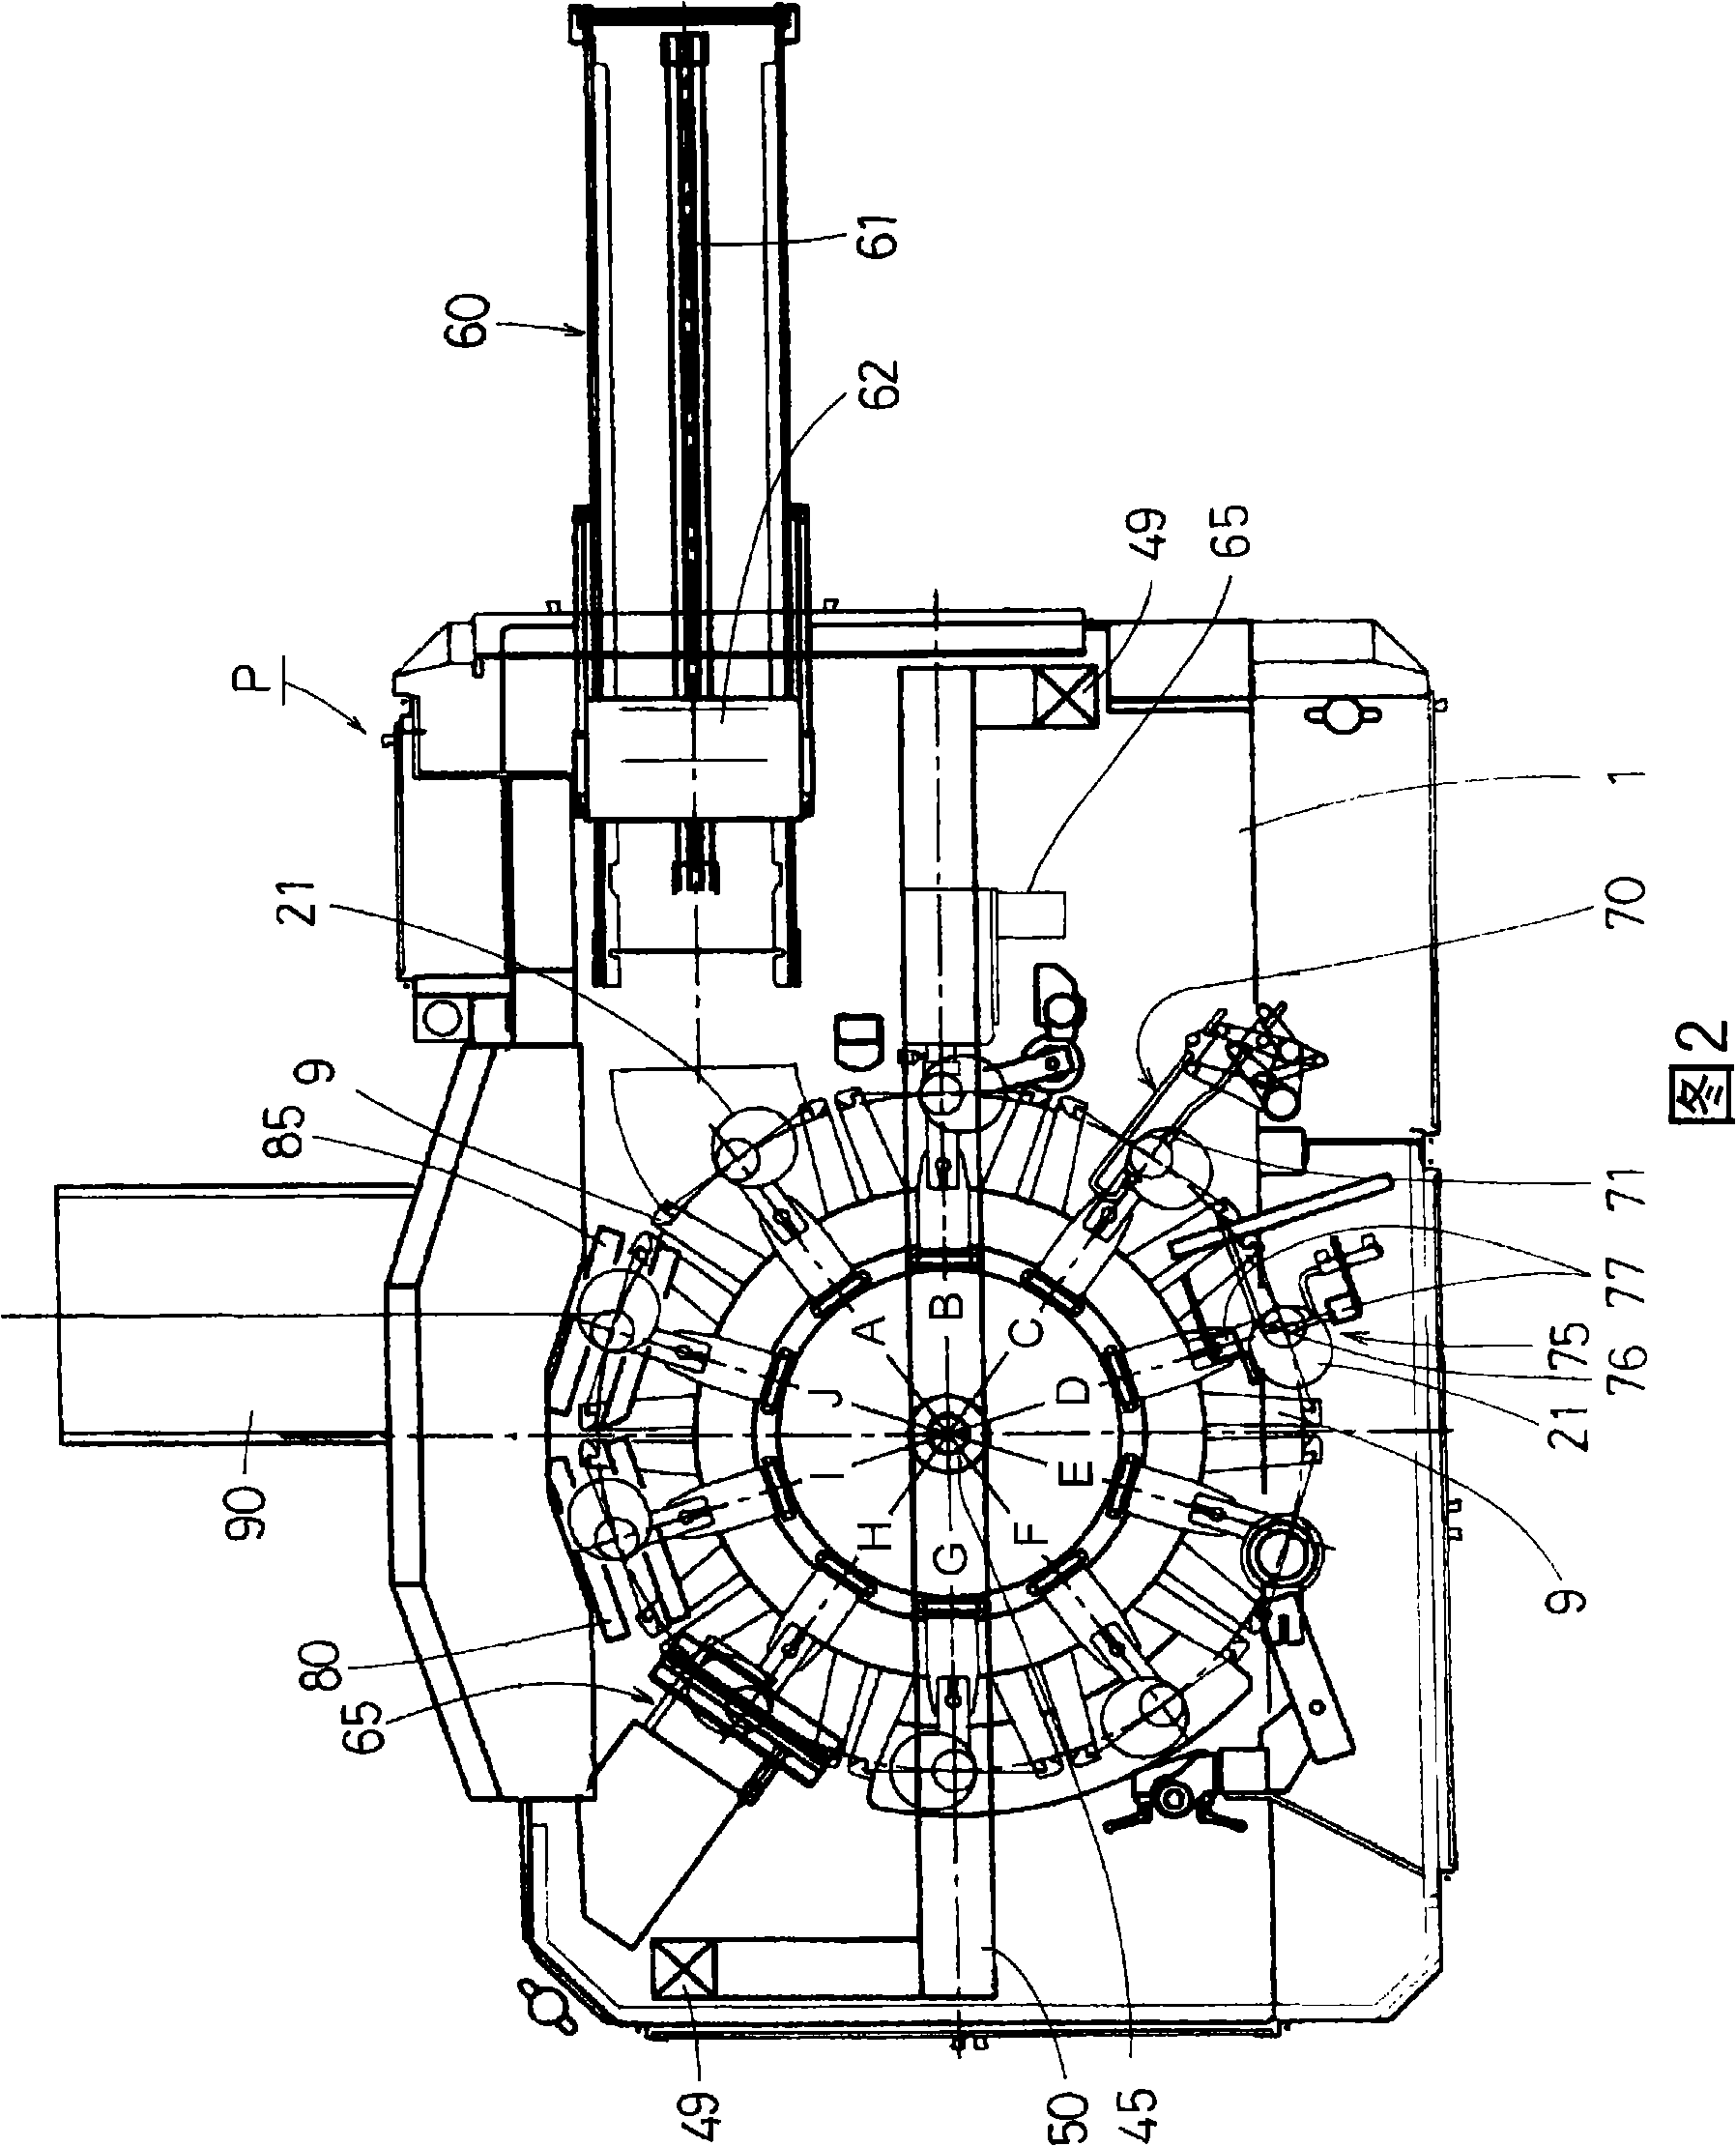 Method for placing inert gas in gas-filling and packaging machine